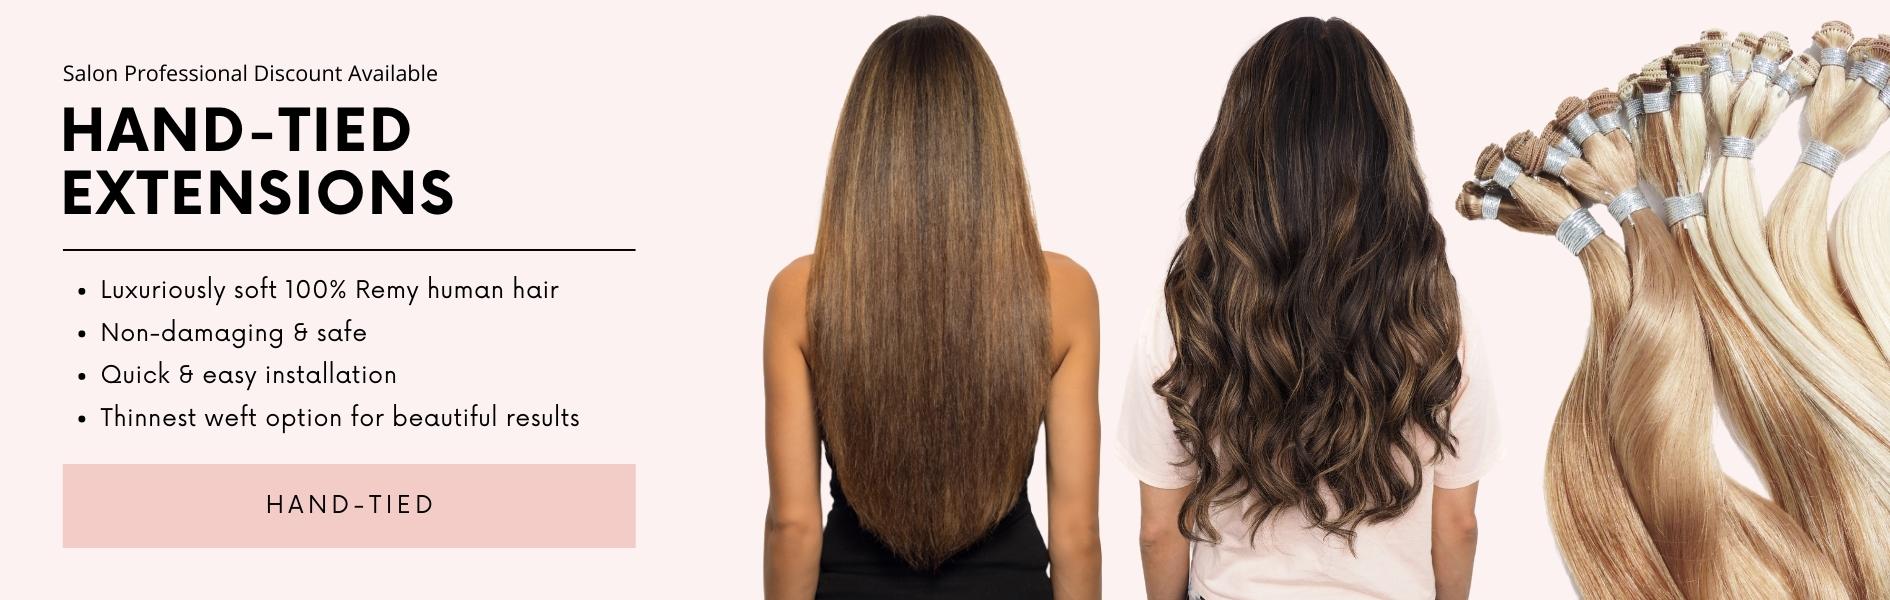 SHOP HAND-TIED EXTENSIONS: Luxuriously soft 100% Remy human hair, Non-damaging & safe, Quick & easy installation, Thinnest weft option for beautiful results; Salon Professional Discount Available